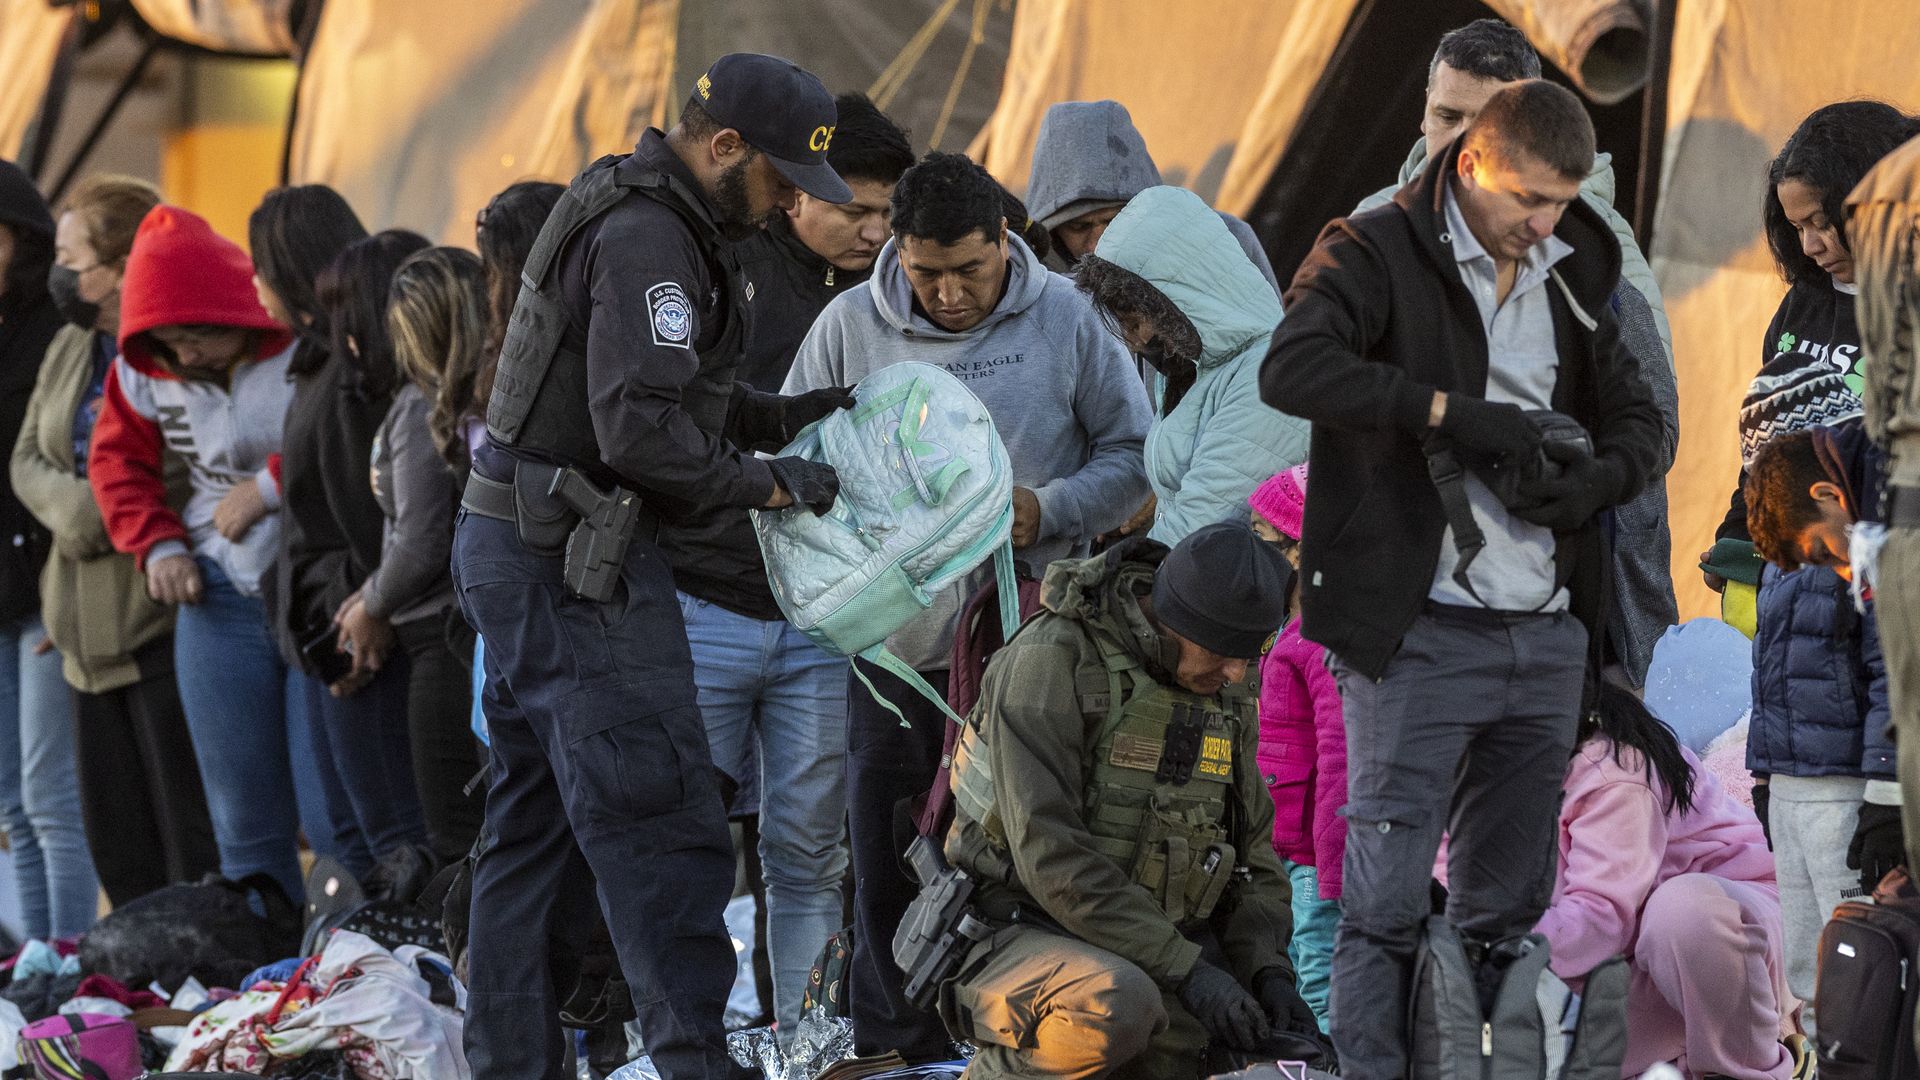 U.S. Customs and Border Protection agents processing people near the U.S.-Mexico border on Dec. 8.